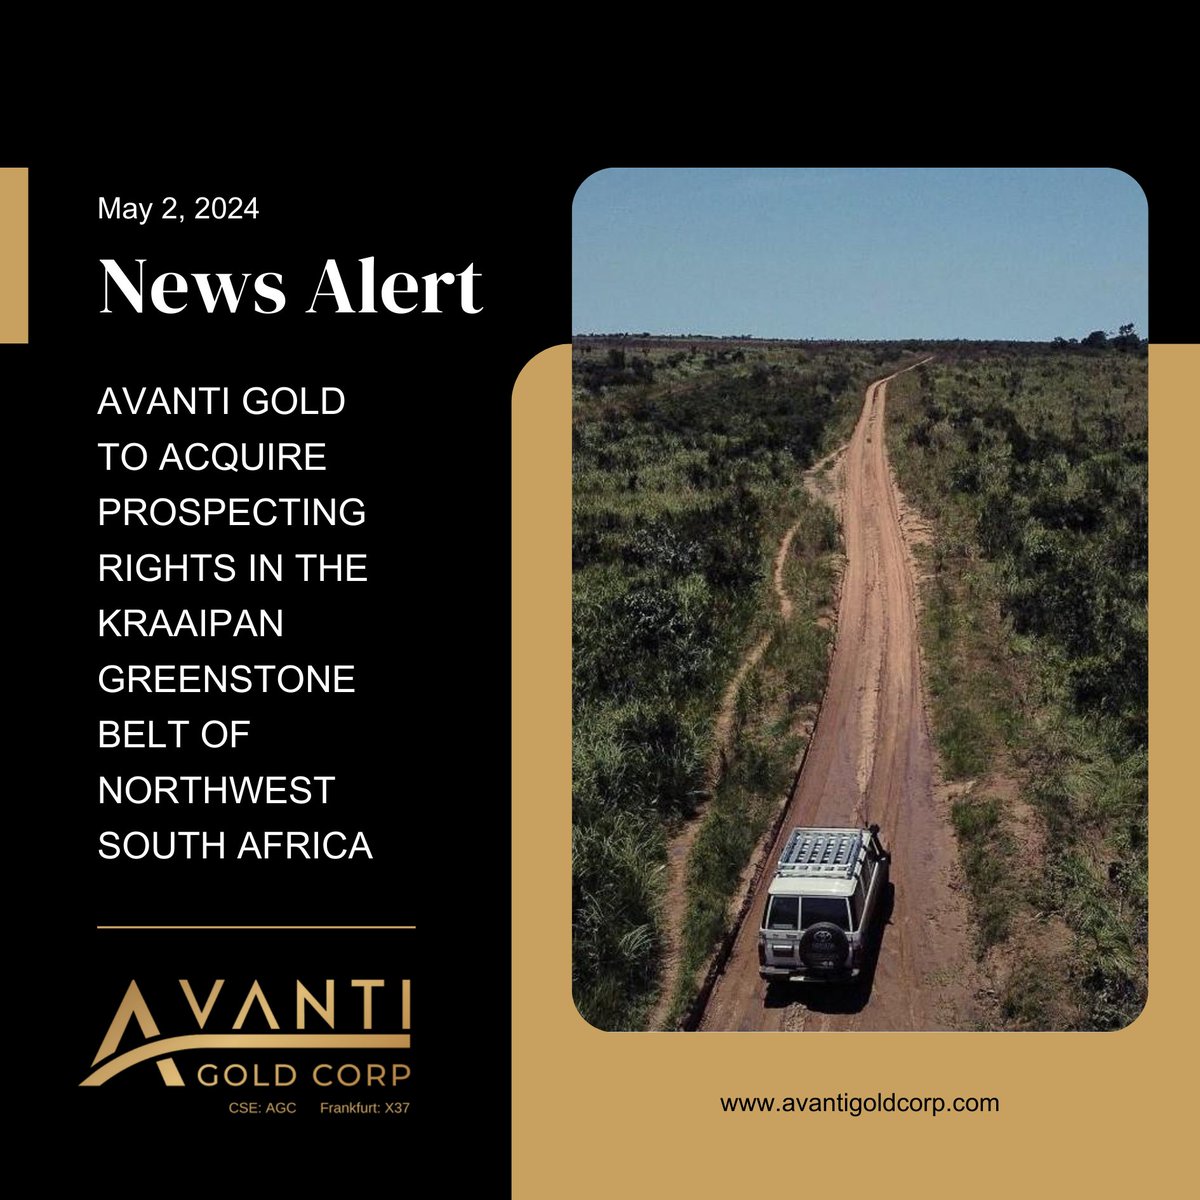 𝐂𝐋𝐈𝐄𝐍𝐓 𝐍𝐄𝐖𝐒 𝐀𝐋𝐄𝐑𝐓 📣 @Avanti_Gold To Acquire Prospecting Rights in The Kraaipan Greenstone Belt of Northwest South Africa! 

🔗tinyurl.com/28pv6mht

#ad #sponsoredcontent
$AGC #gold #mining #SouthAfrica